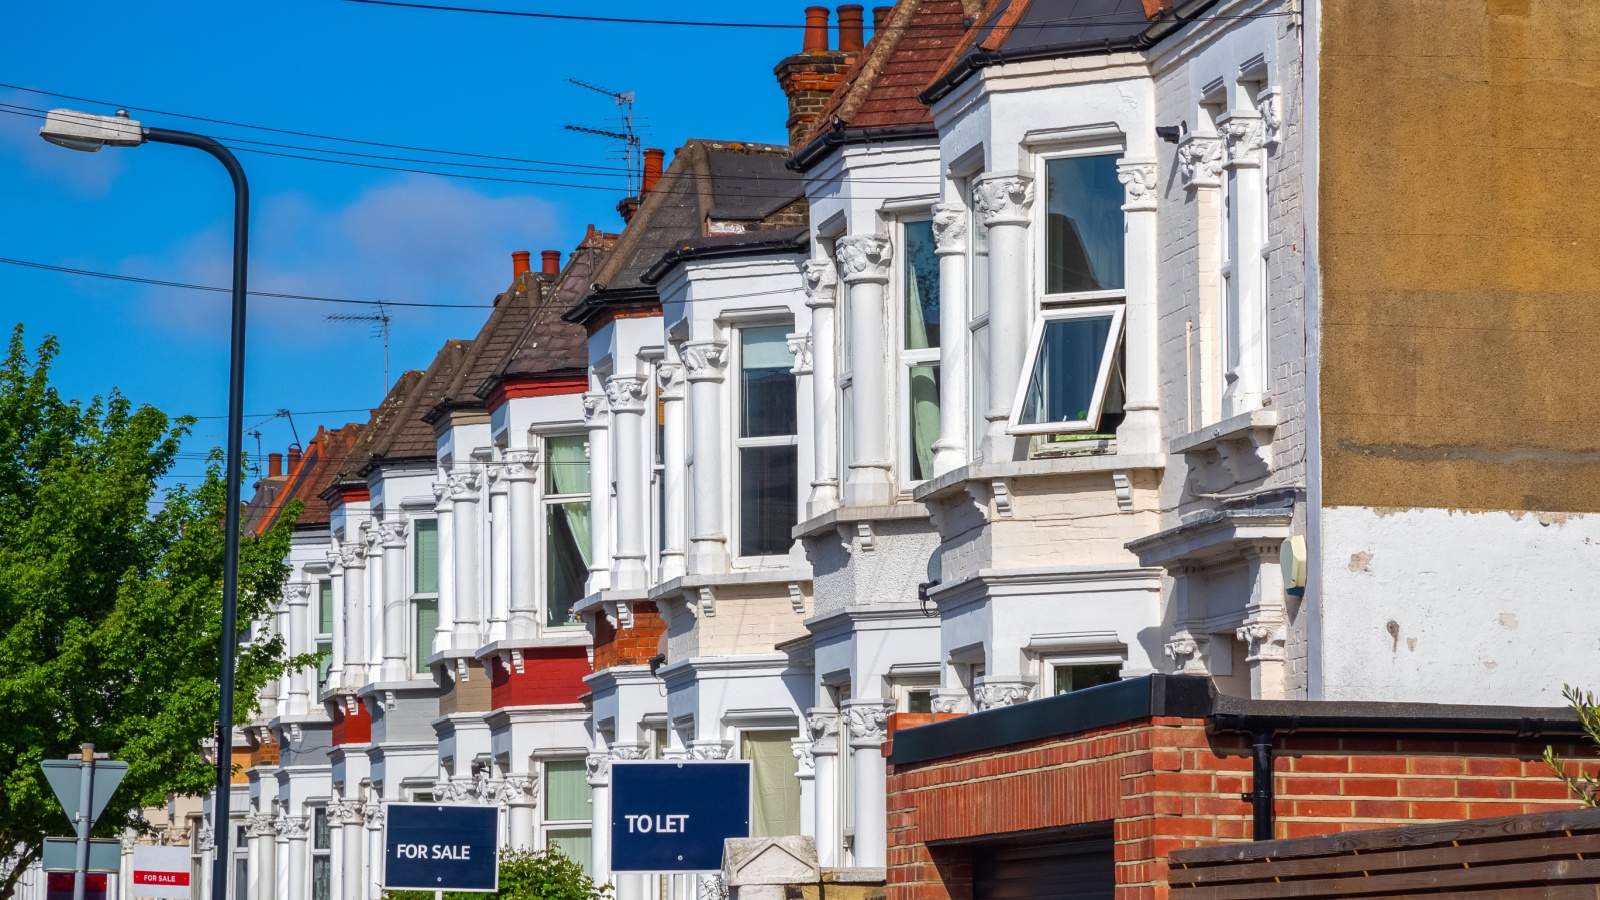 A row of typical British terraced houses around Kensal Rise in London with estate agent boards